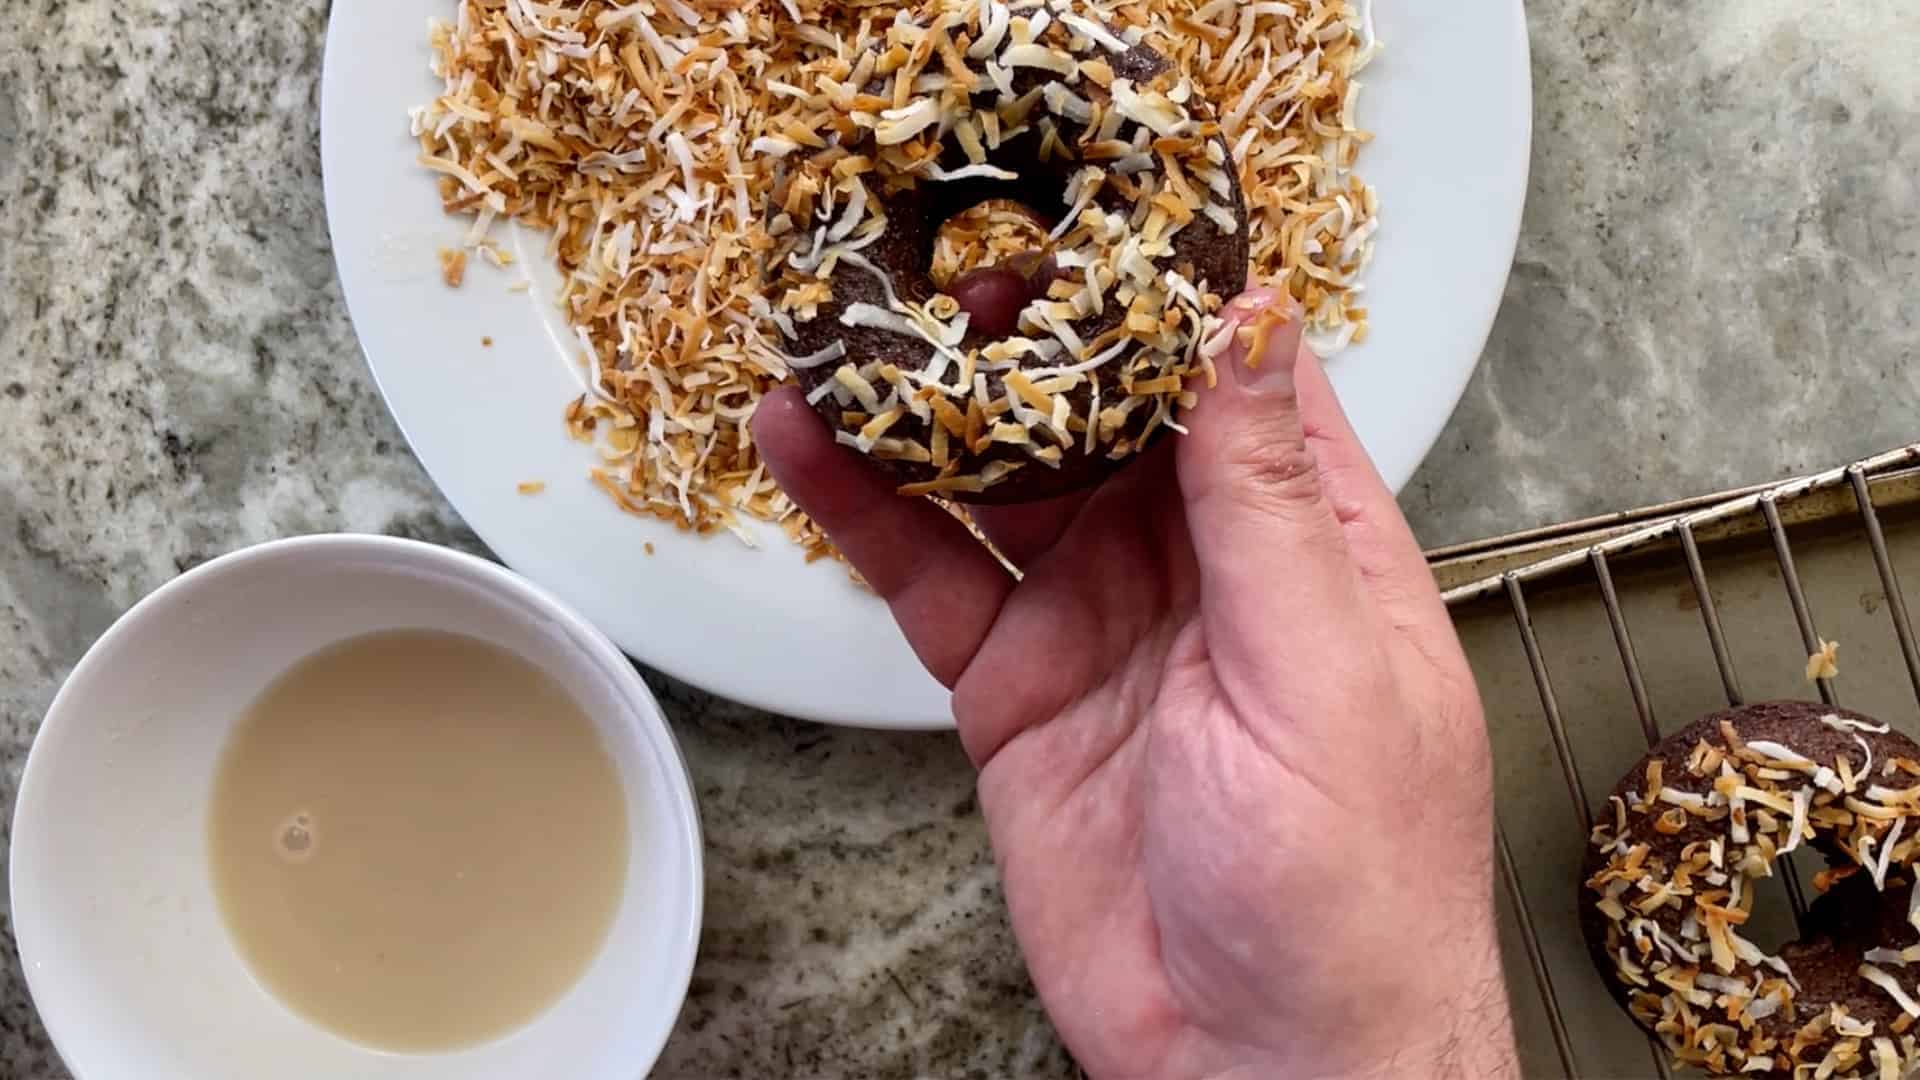 doughnut assembly into glaze and toasted coconut